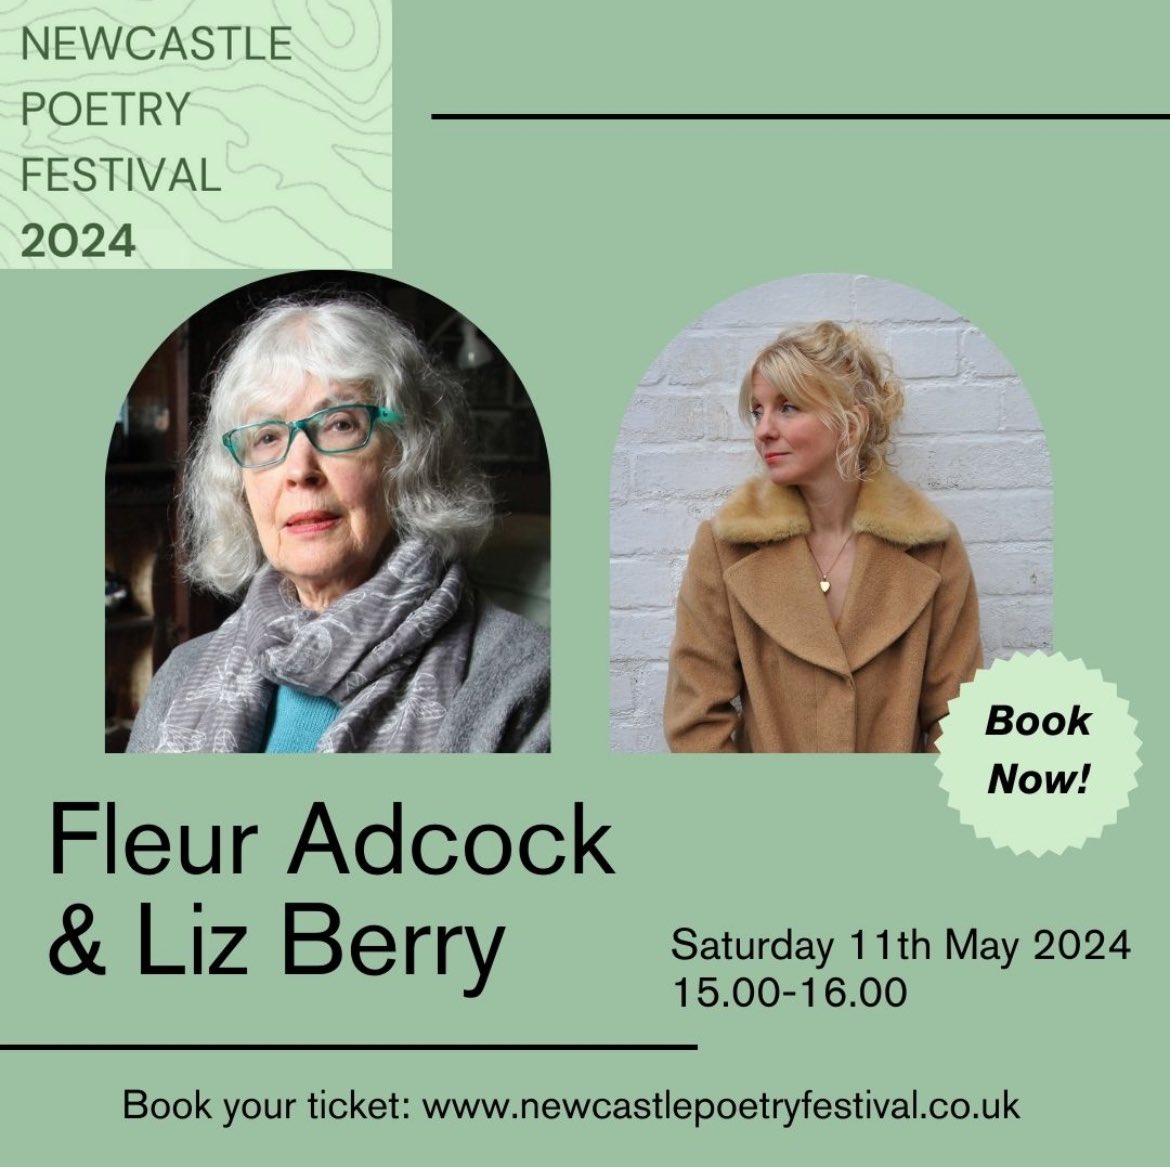 This will be a very special event with poets Fleur Adcock & Liz Berry celebrating their most recent collections, including Fleur’s ‘Collected Poems’ and Liz’s ‘The Home Child’ 📚 Sat 11 May, 3.30-4.30pm 🎫newcastlepoetryfestival.co.uk